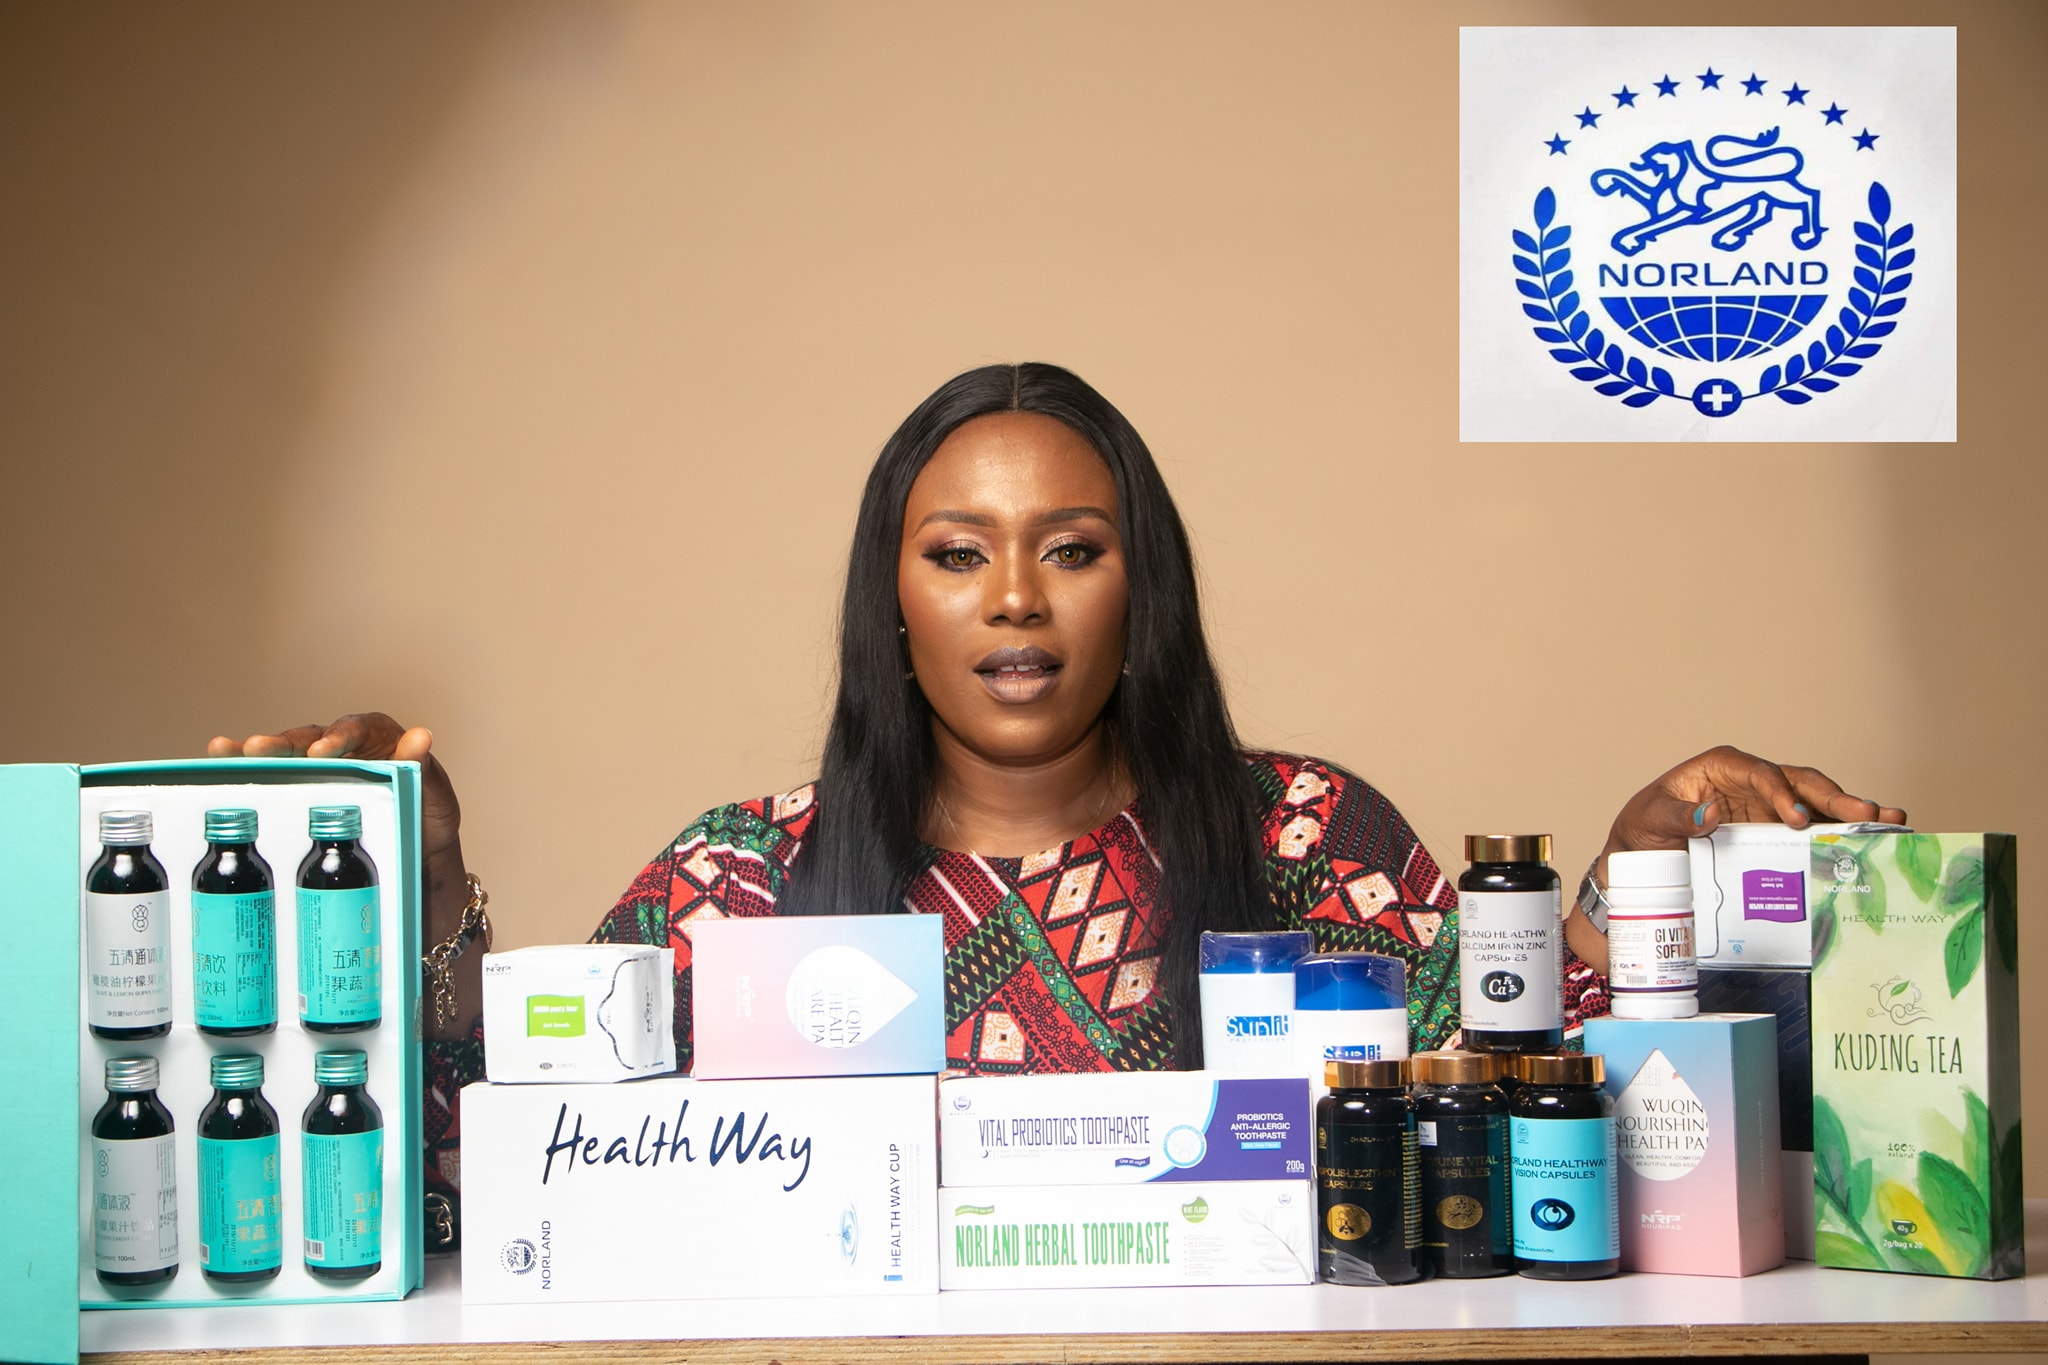 How to Buy Norland Products in Ibadan, Oyo state, Nigeria